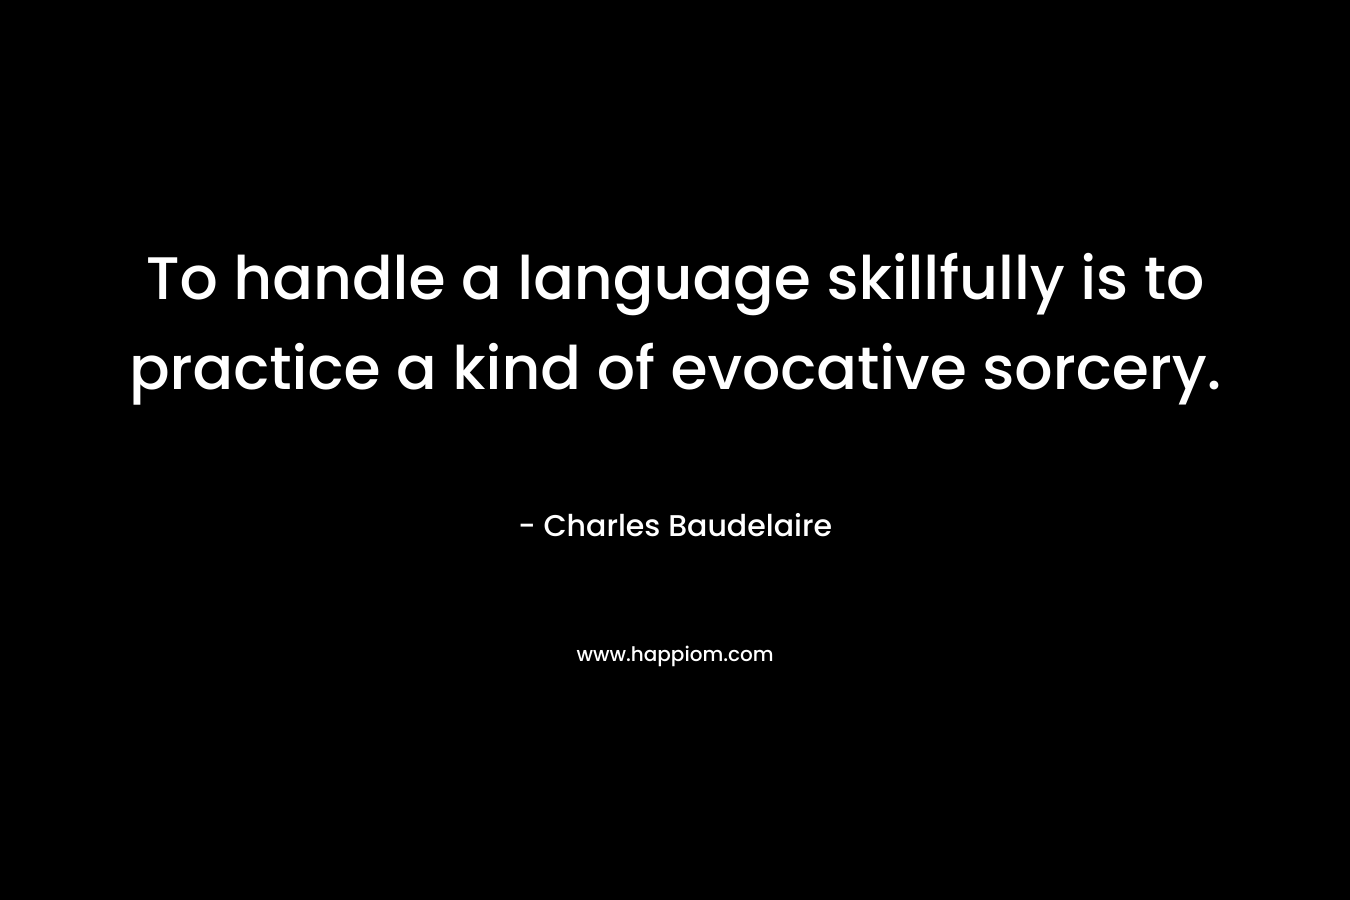 To handle a language skillfully is to practice a kind of evocative sorcery. – Charles Baudelaire